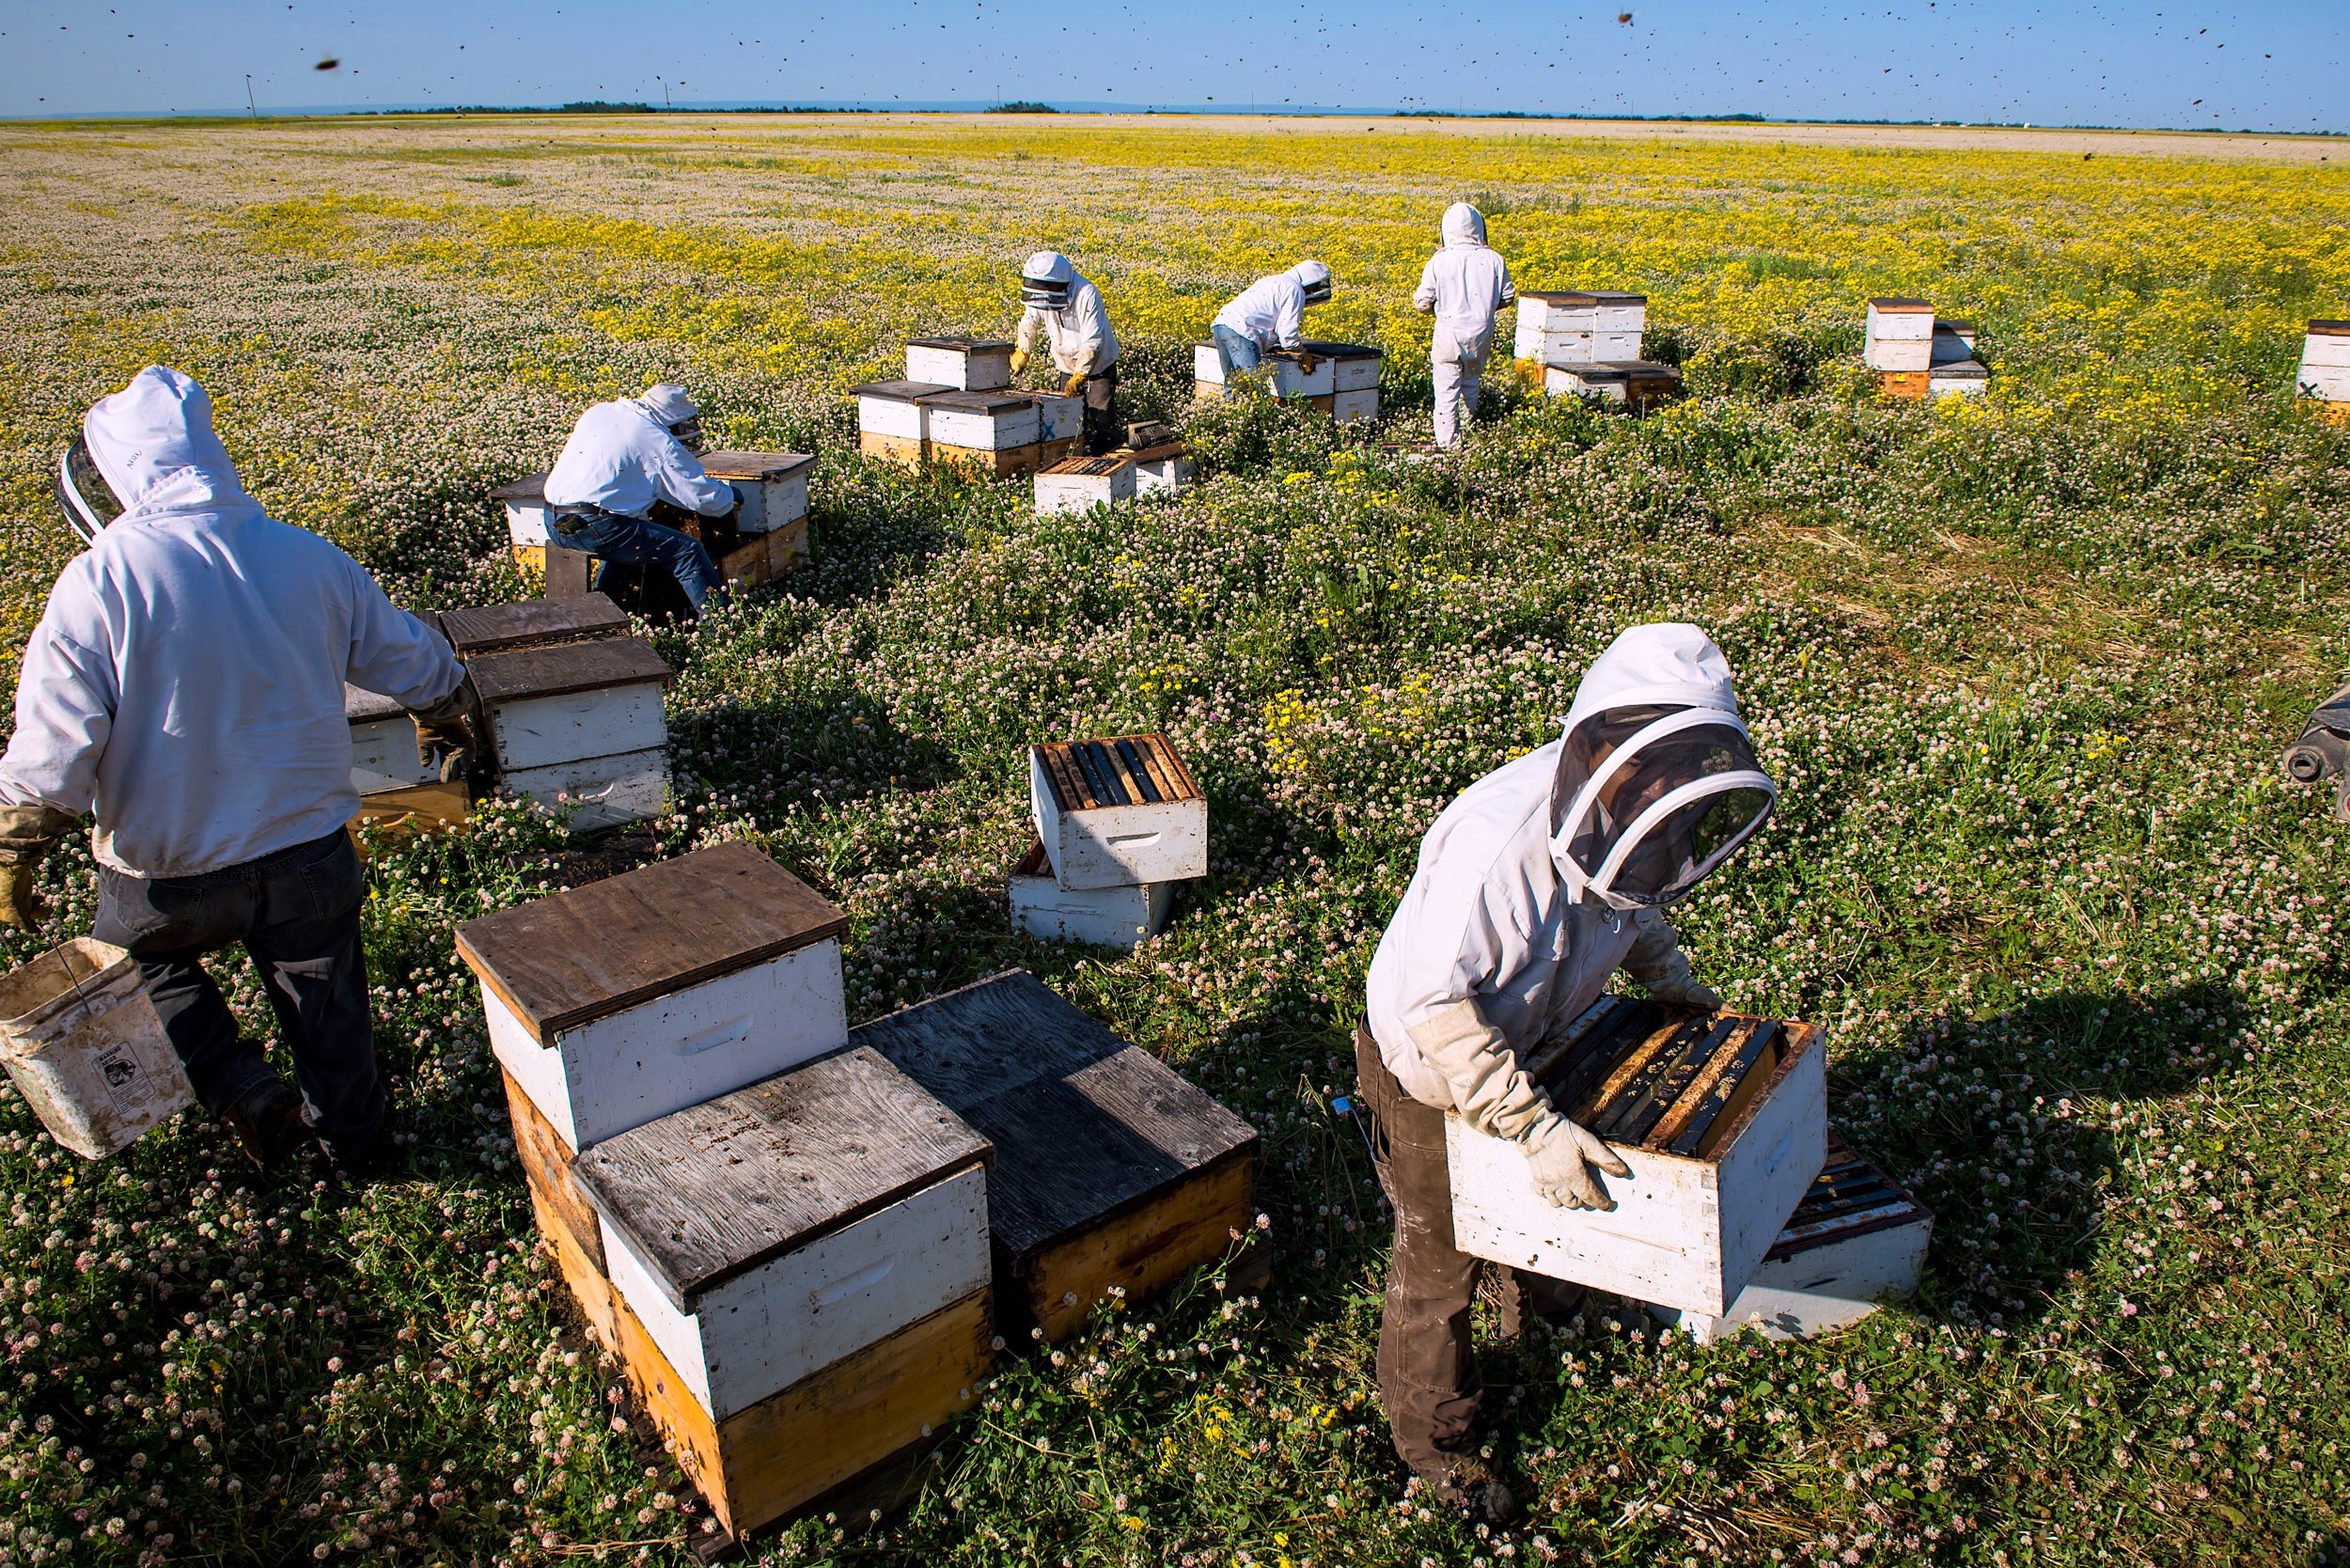  As the summer progresses the beehives will mature as flowers and food sources increase. Just before harvest, around the middle of July, hives can reach up to eight boxes in height and yield up to 200 pounds of honey per colony. 